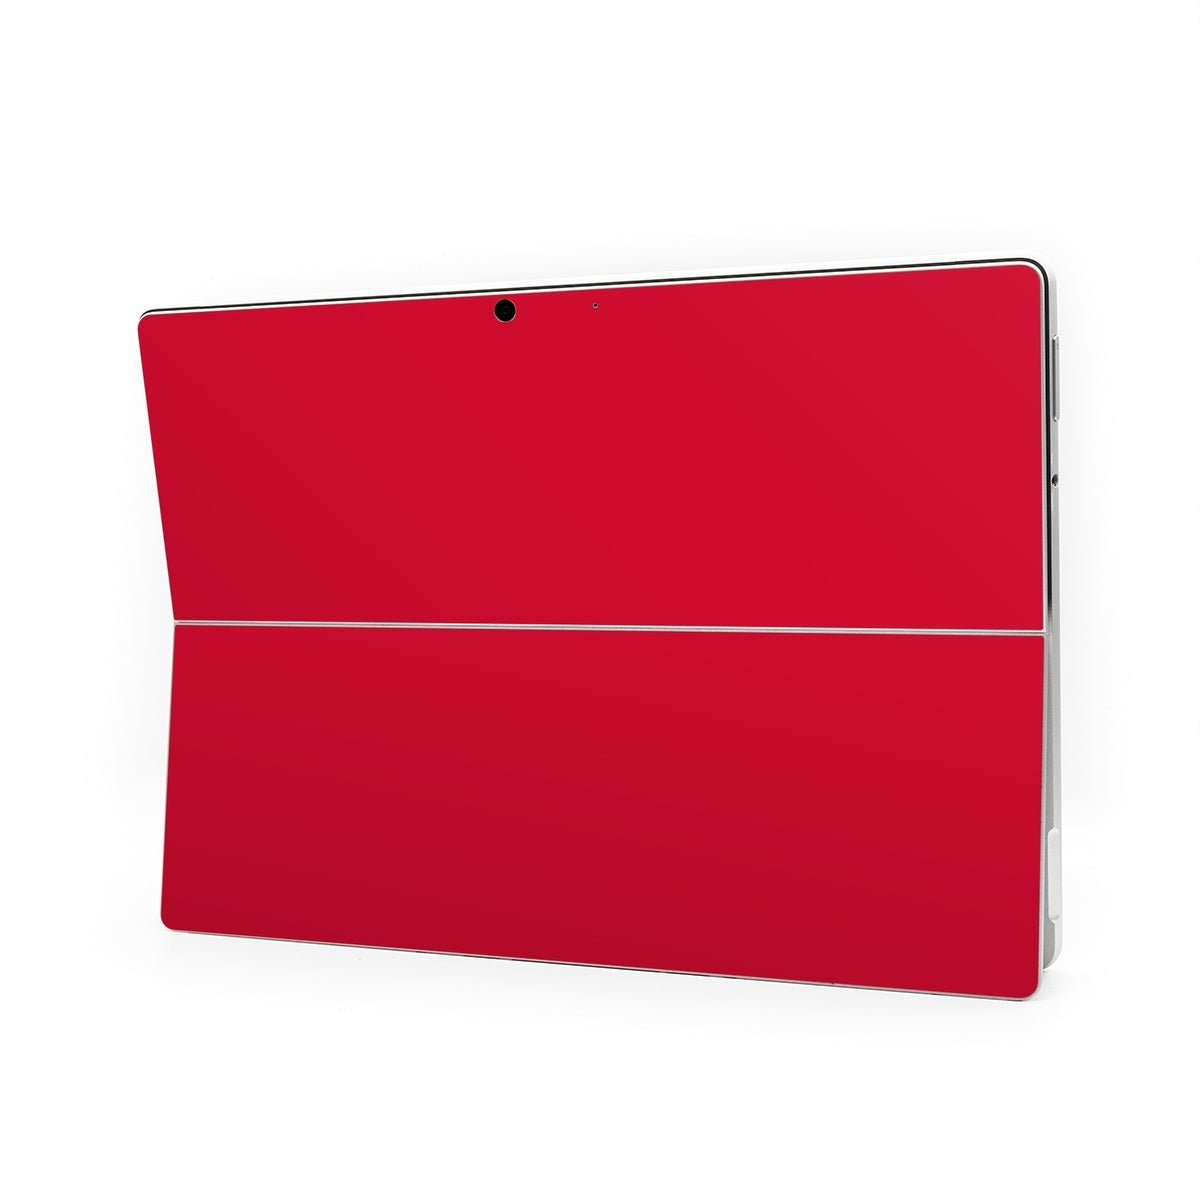 Solid State Red - Microsoft Surface Pro Skin